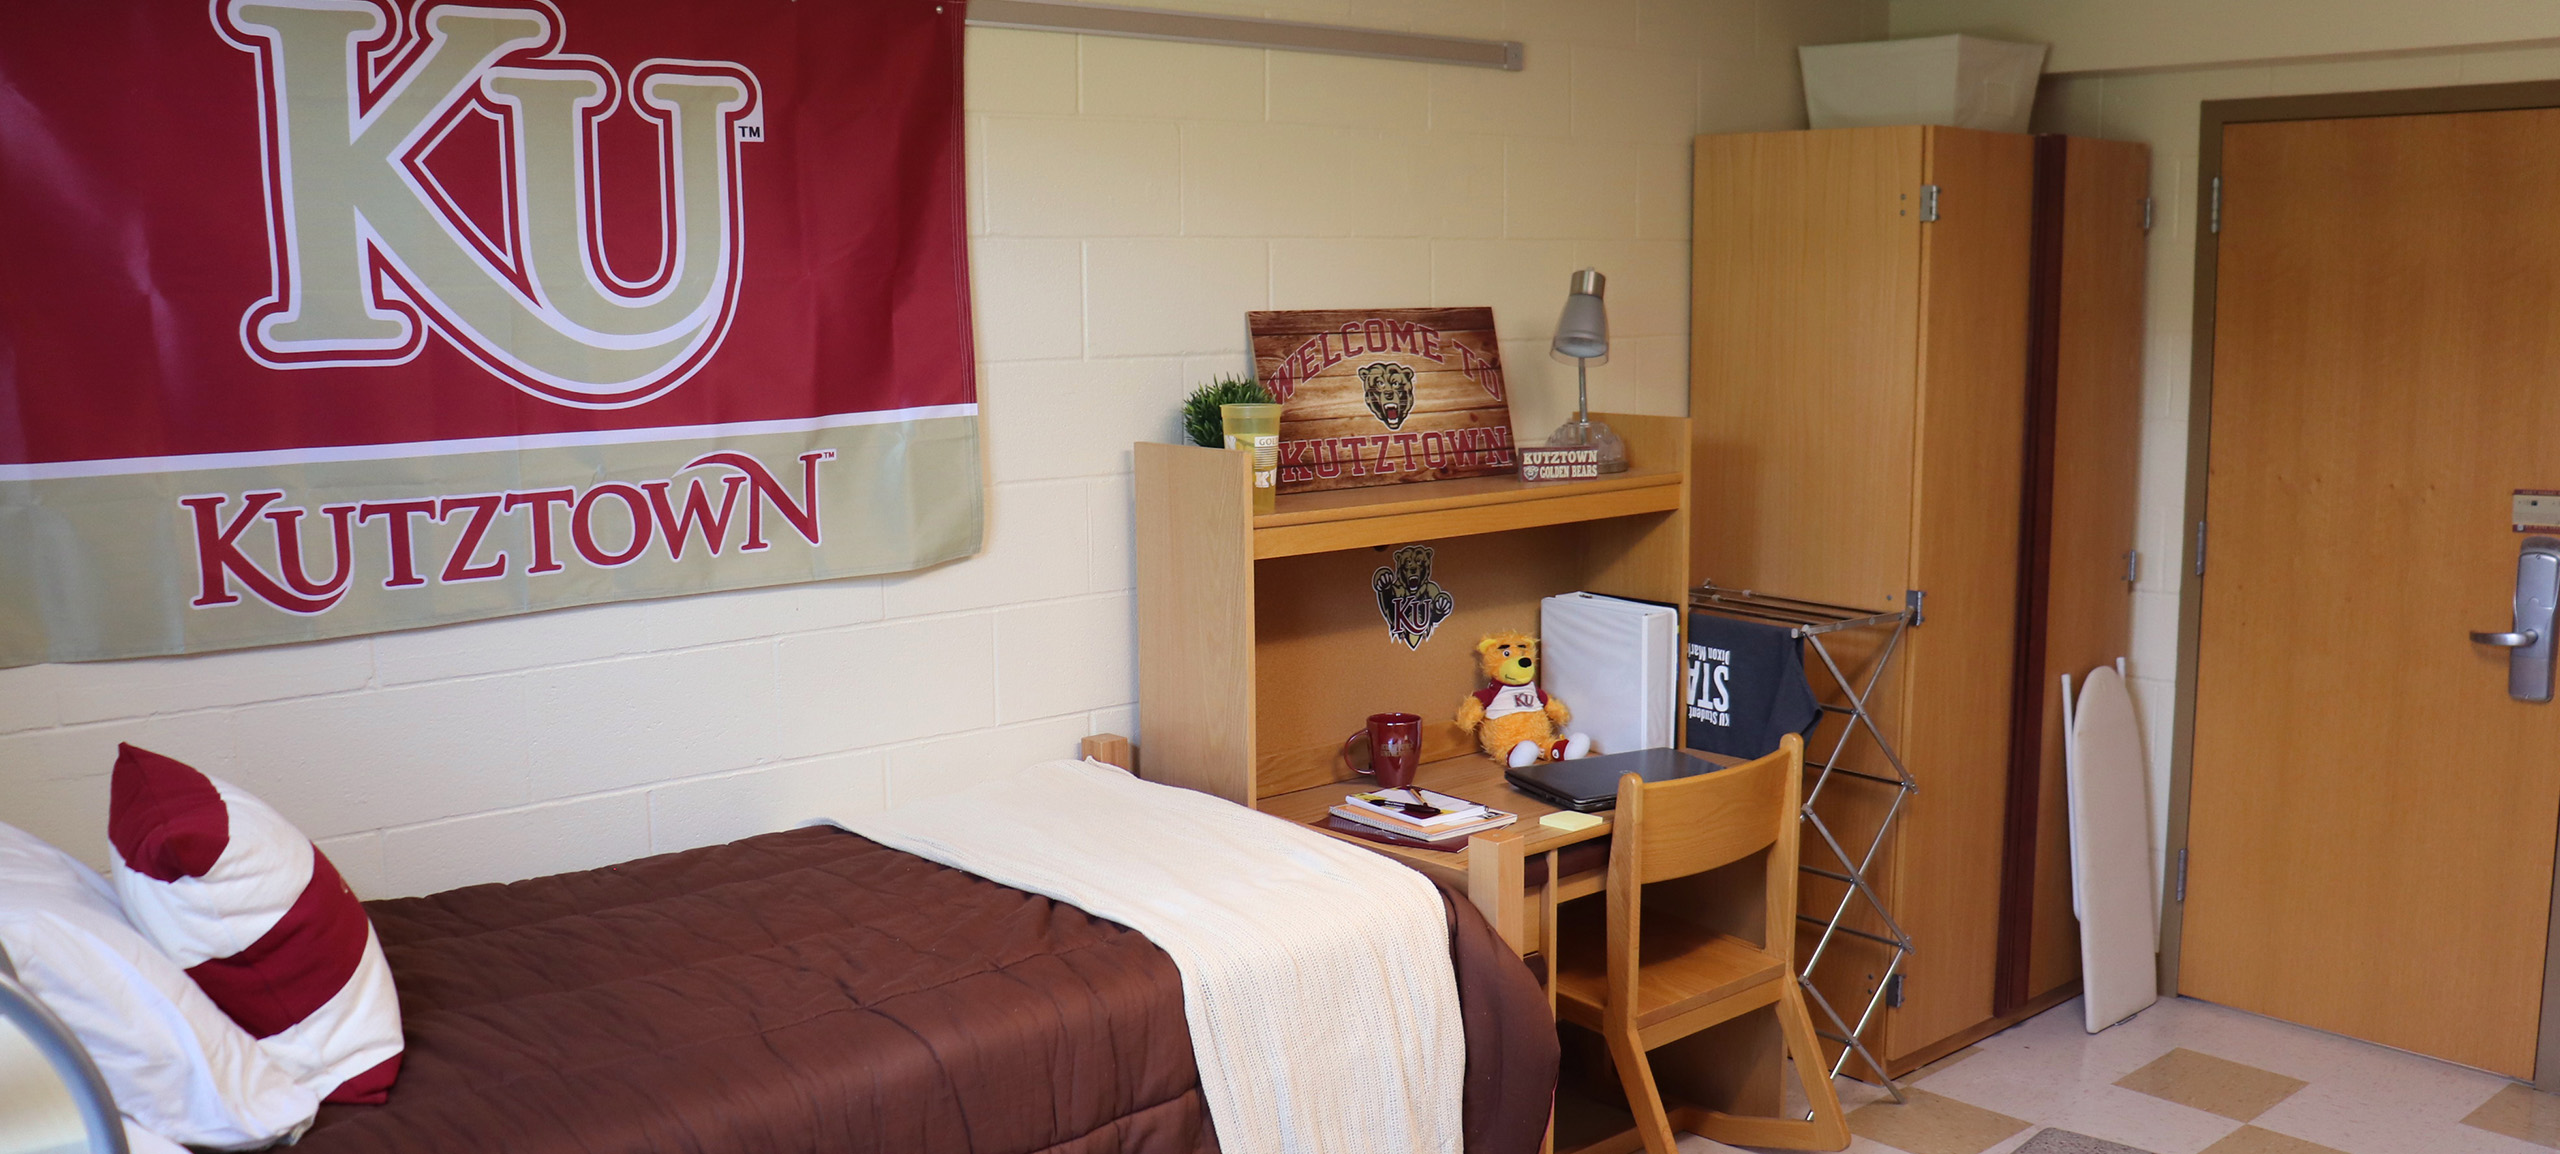 university residence hall room outfitted with KU gear